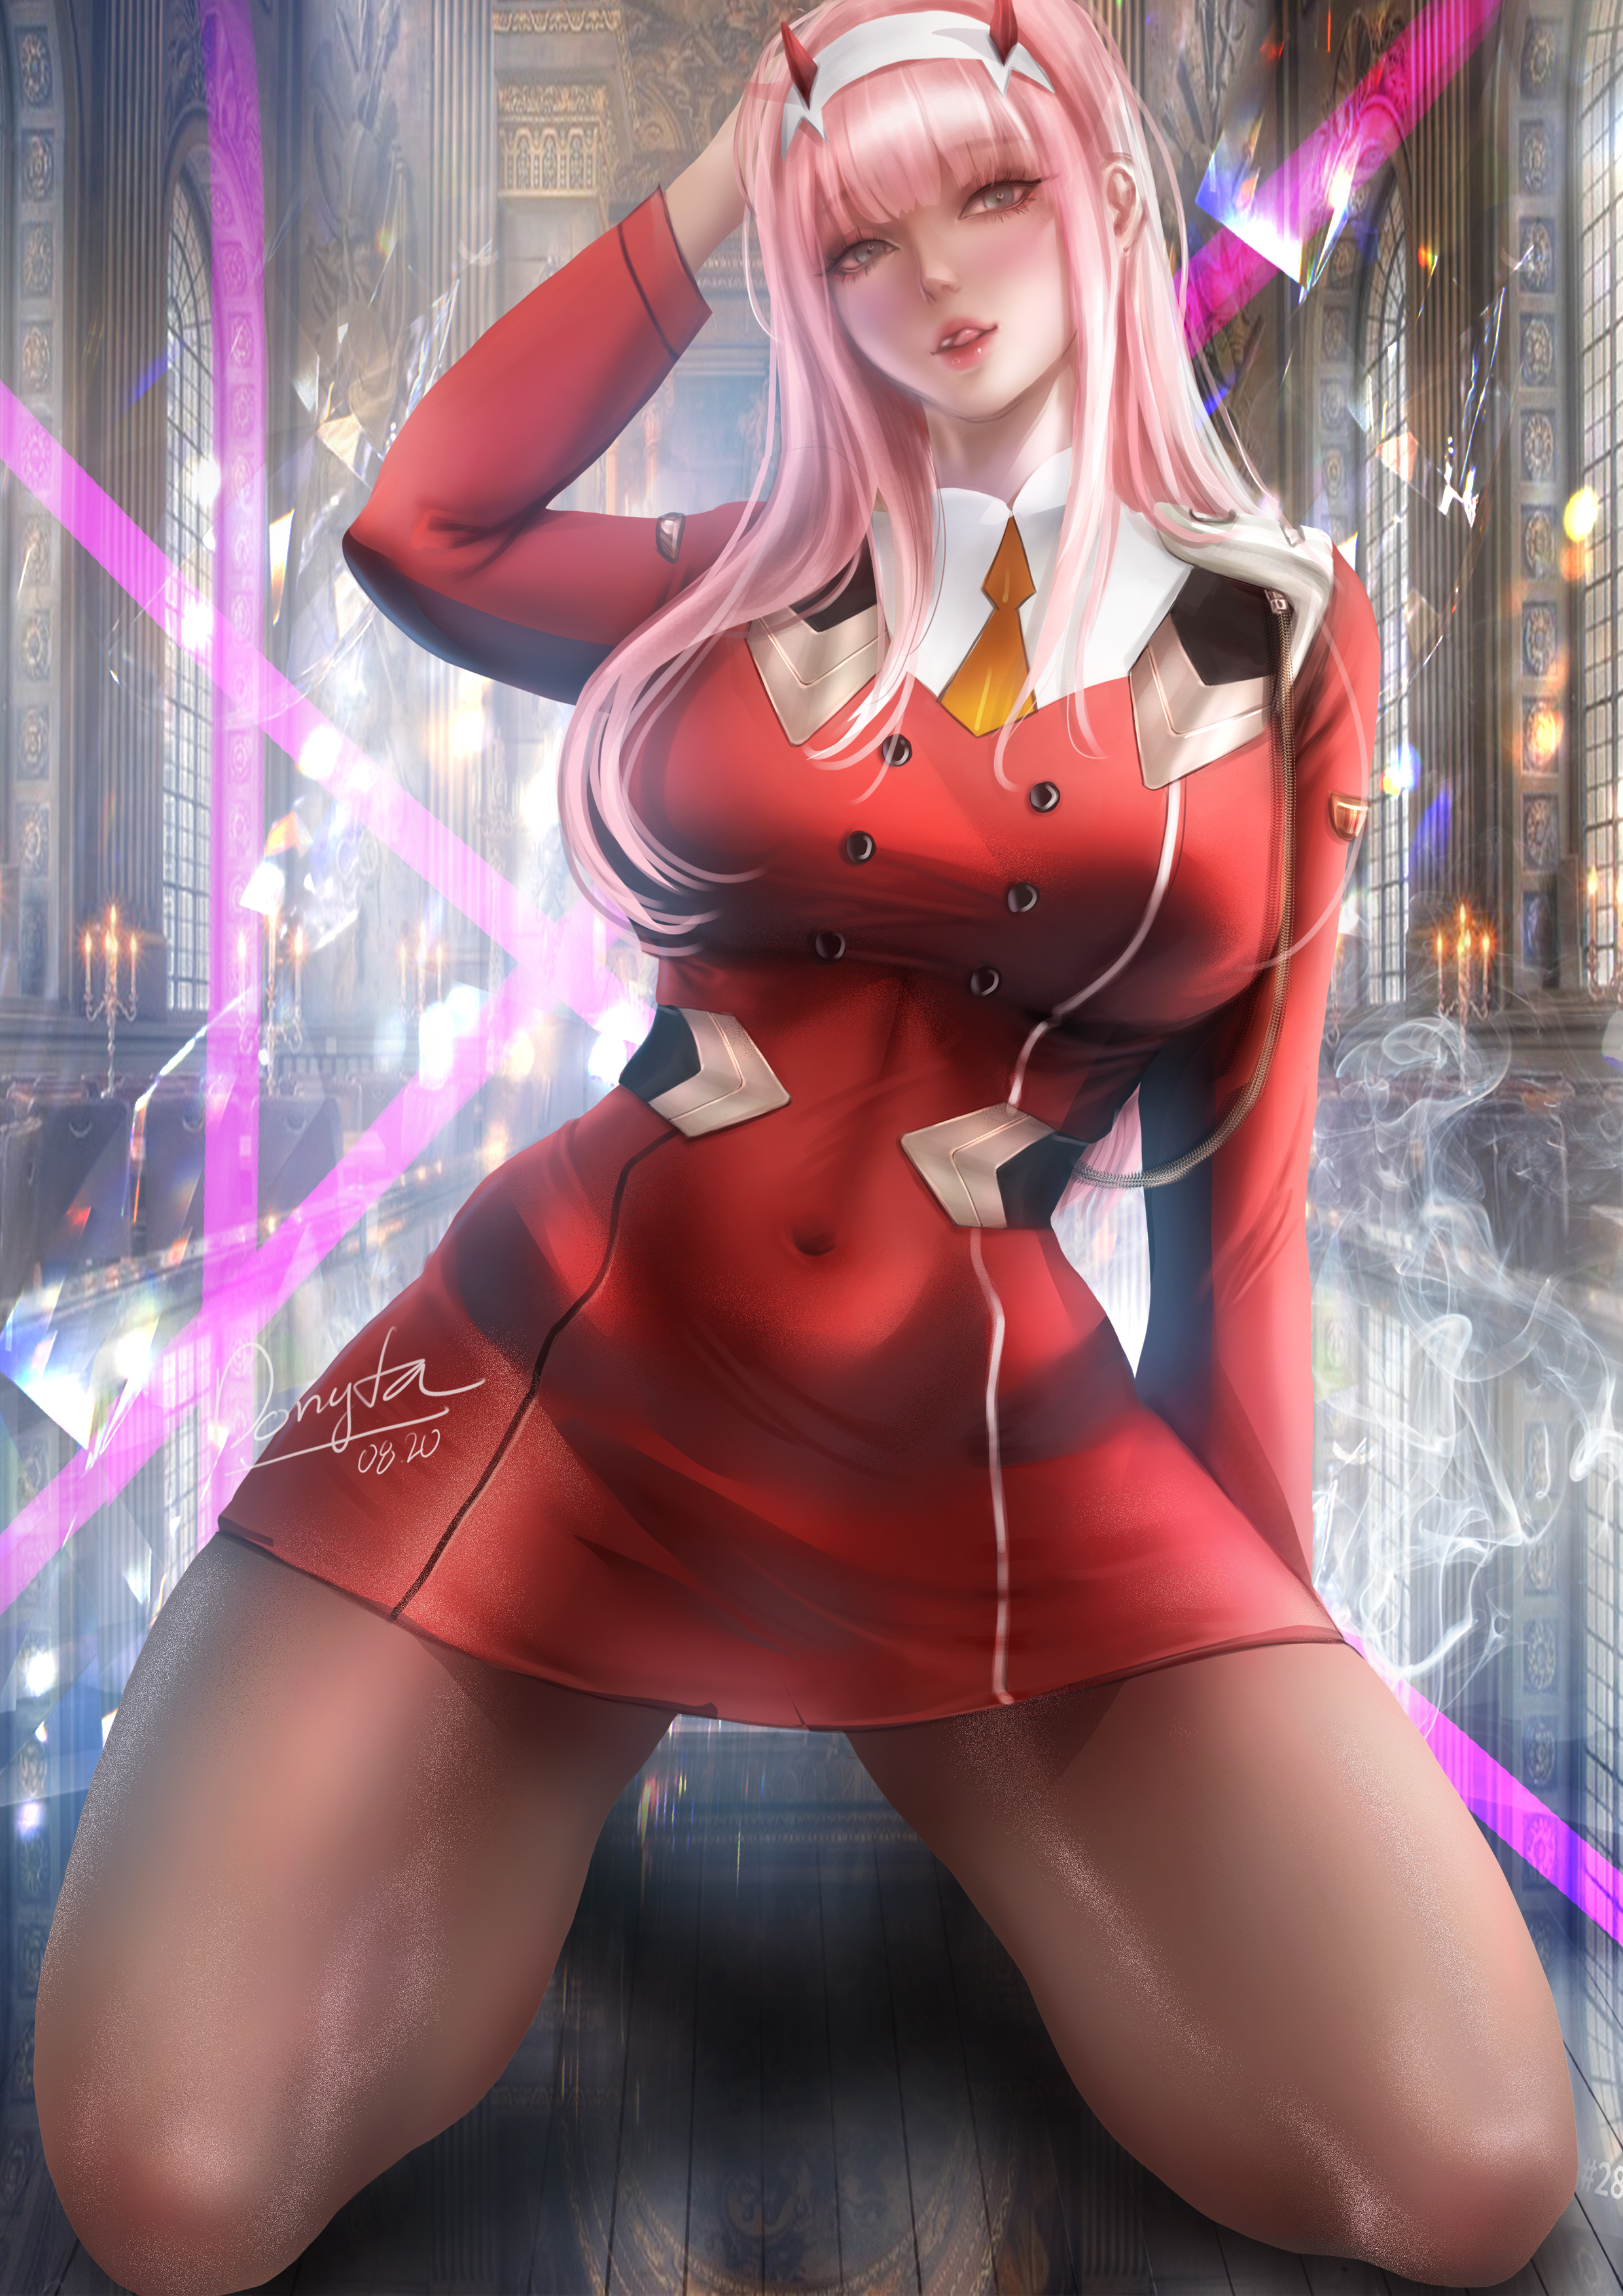 Anime 2480x3508 Zero Two (Darling in the FranXX) Darling in the FranXX anime anime girls fantasy girl horns pink hair curvy thick thigh kneeling blushing licking lips 2D artwork drawing fan art Donyta pantyhose